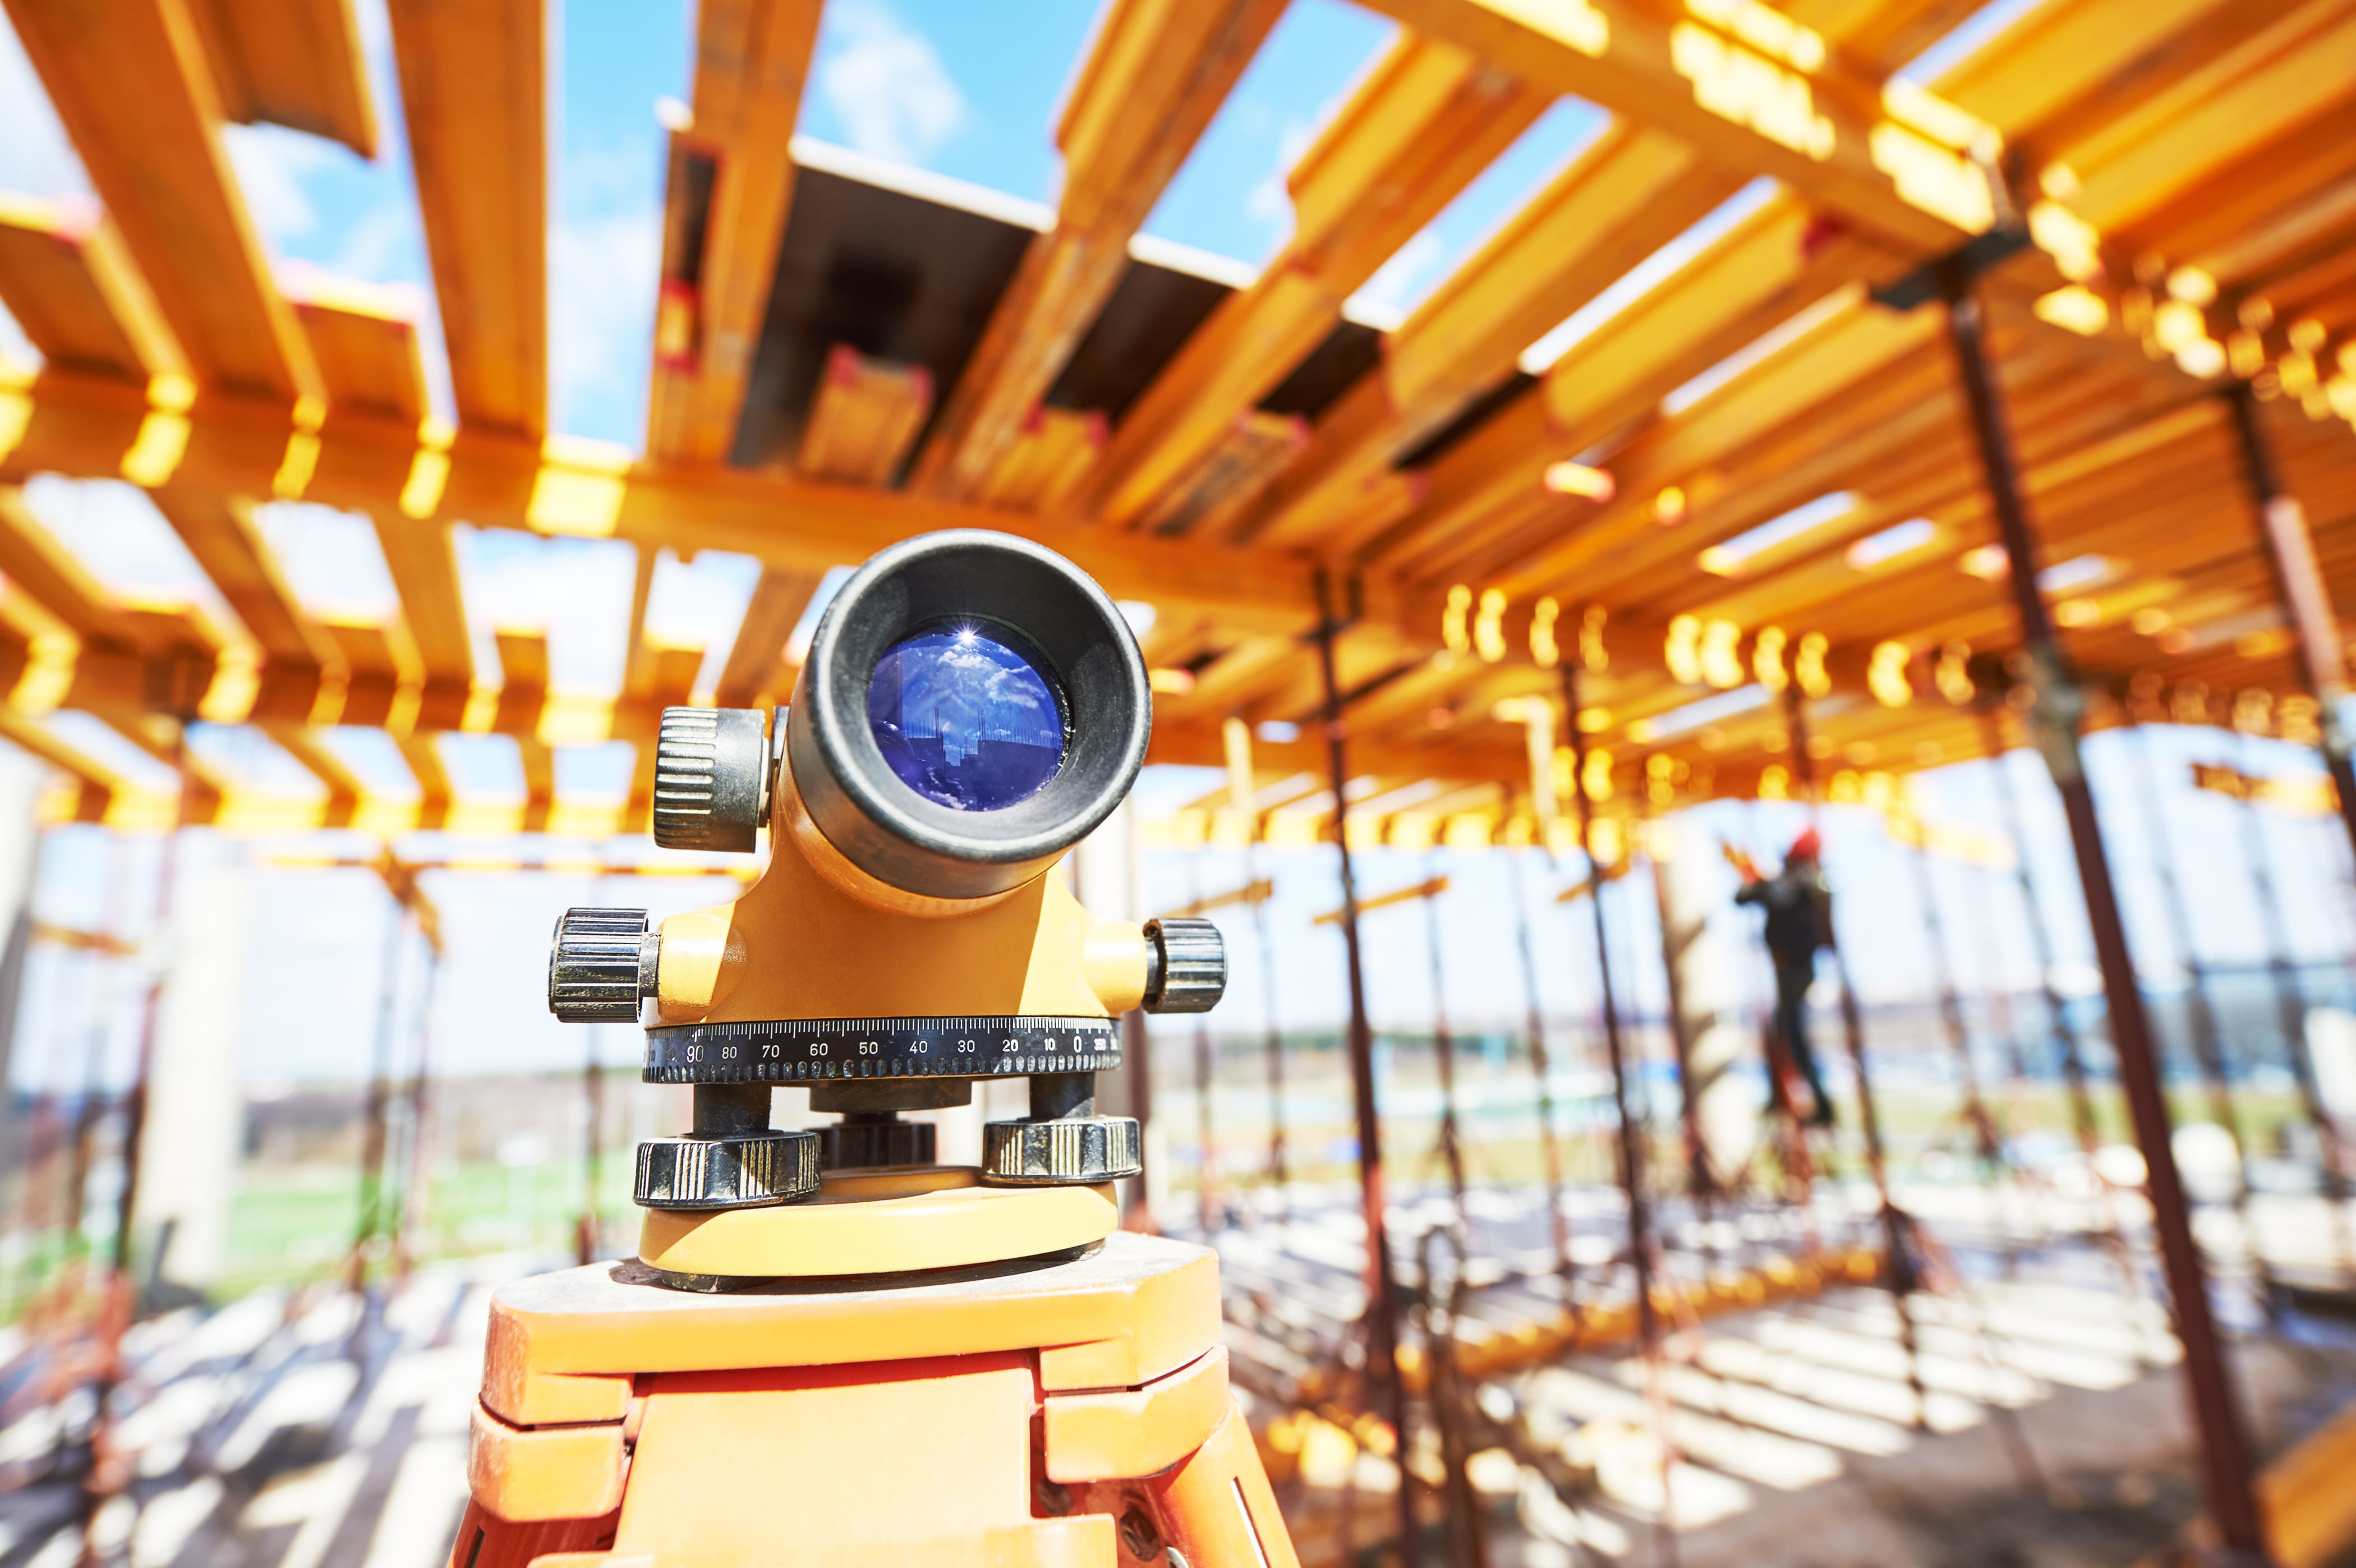 Lasers, Robots and Machetes: Why Surveyors Use the Coolest Tools